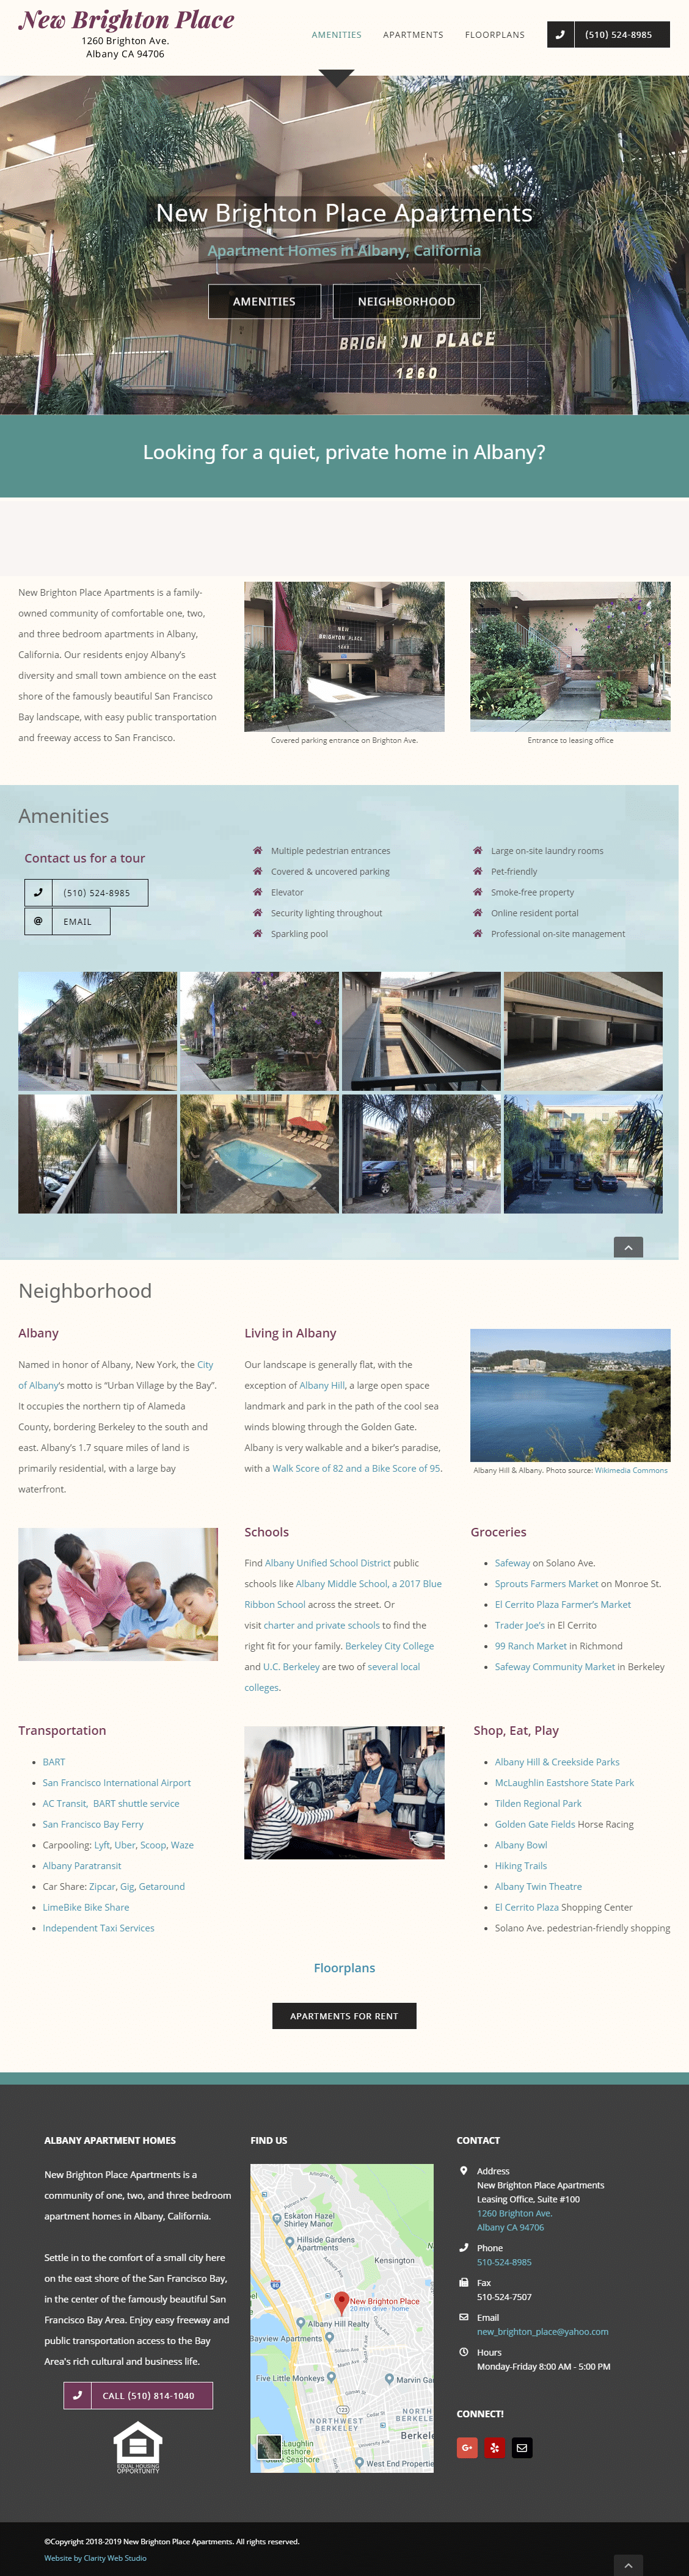 Alameda Park Apartments home page